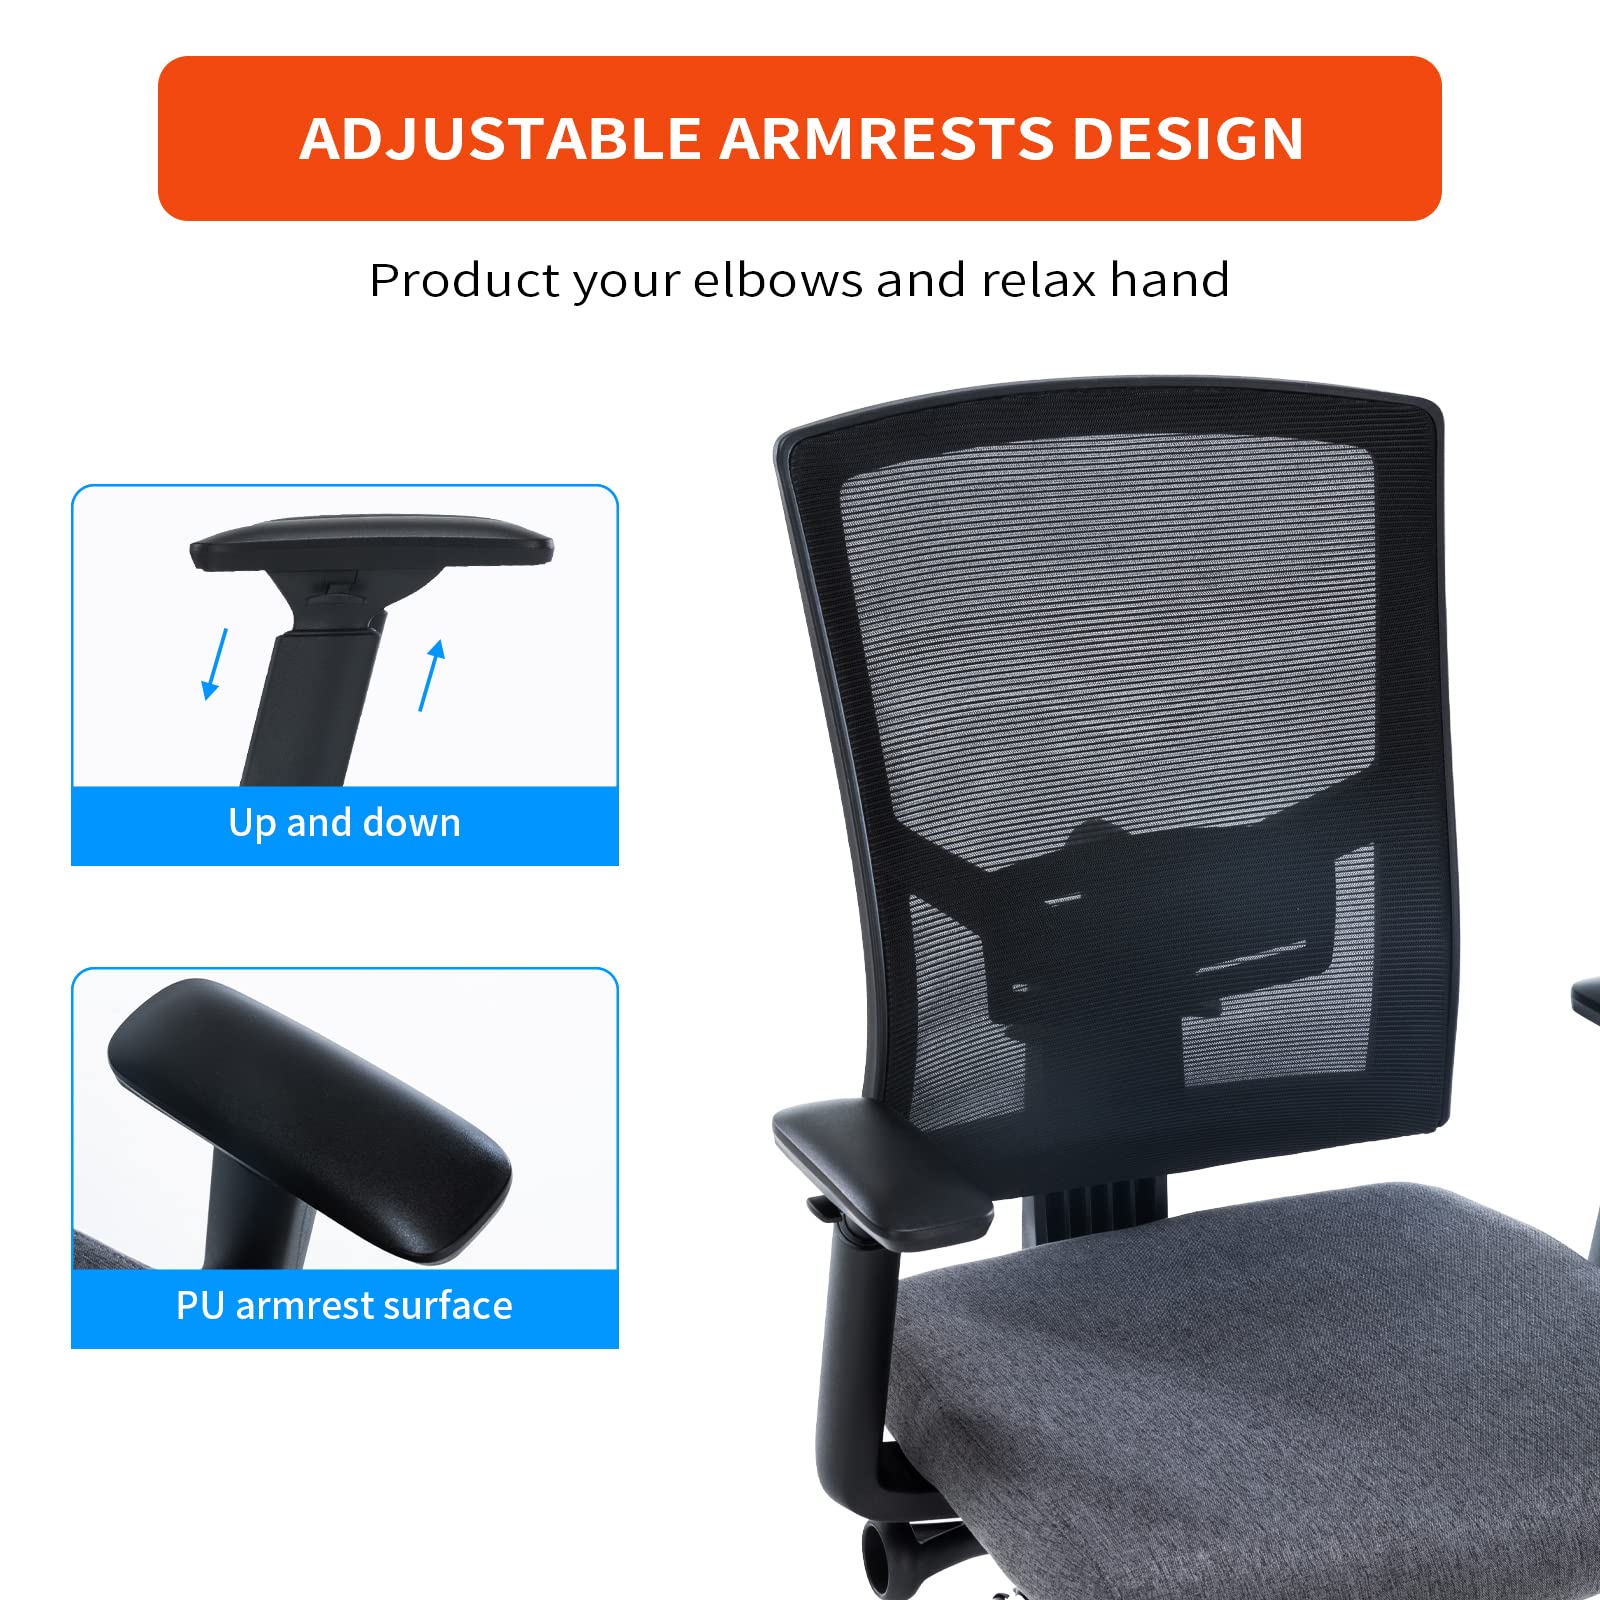 Lumbar Support Pillow for Office Chair - Designed ergonomically to